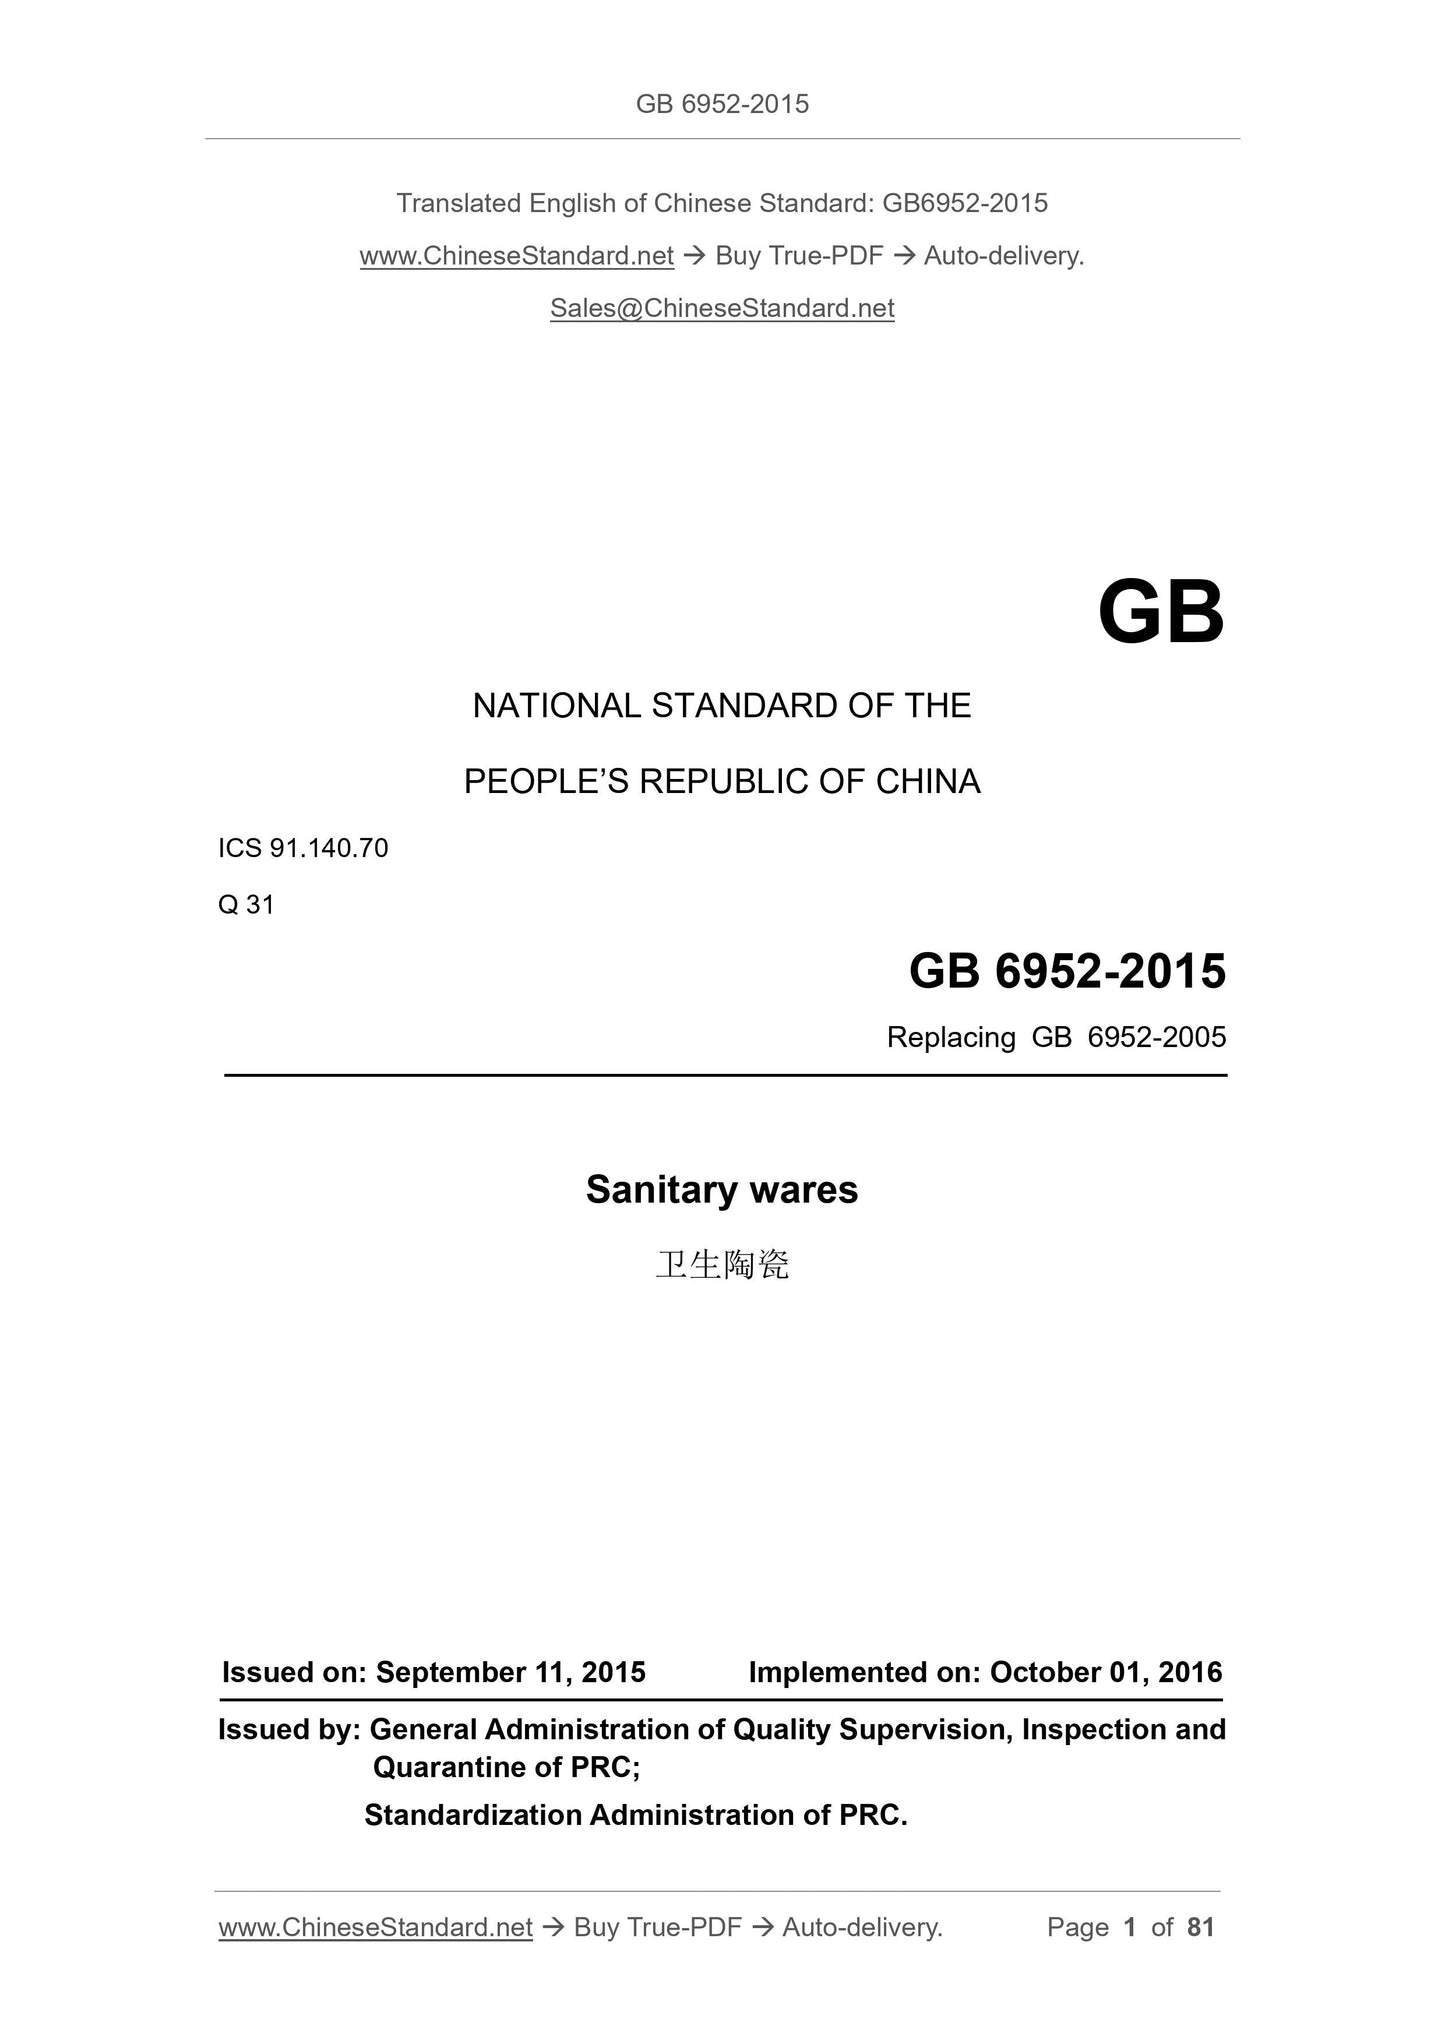 GB 6952-2015 Page 1